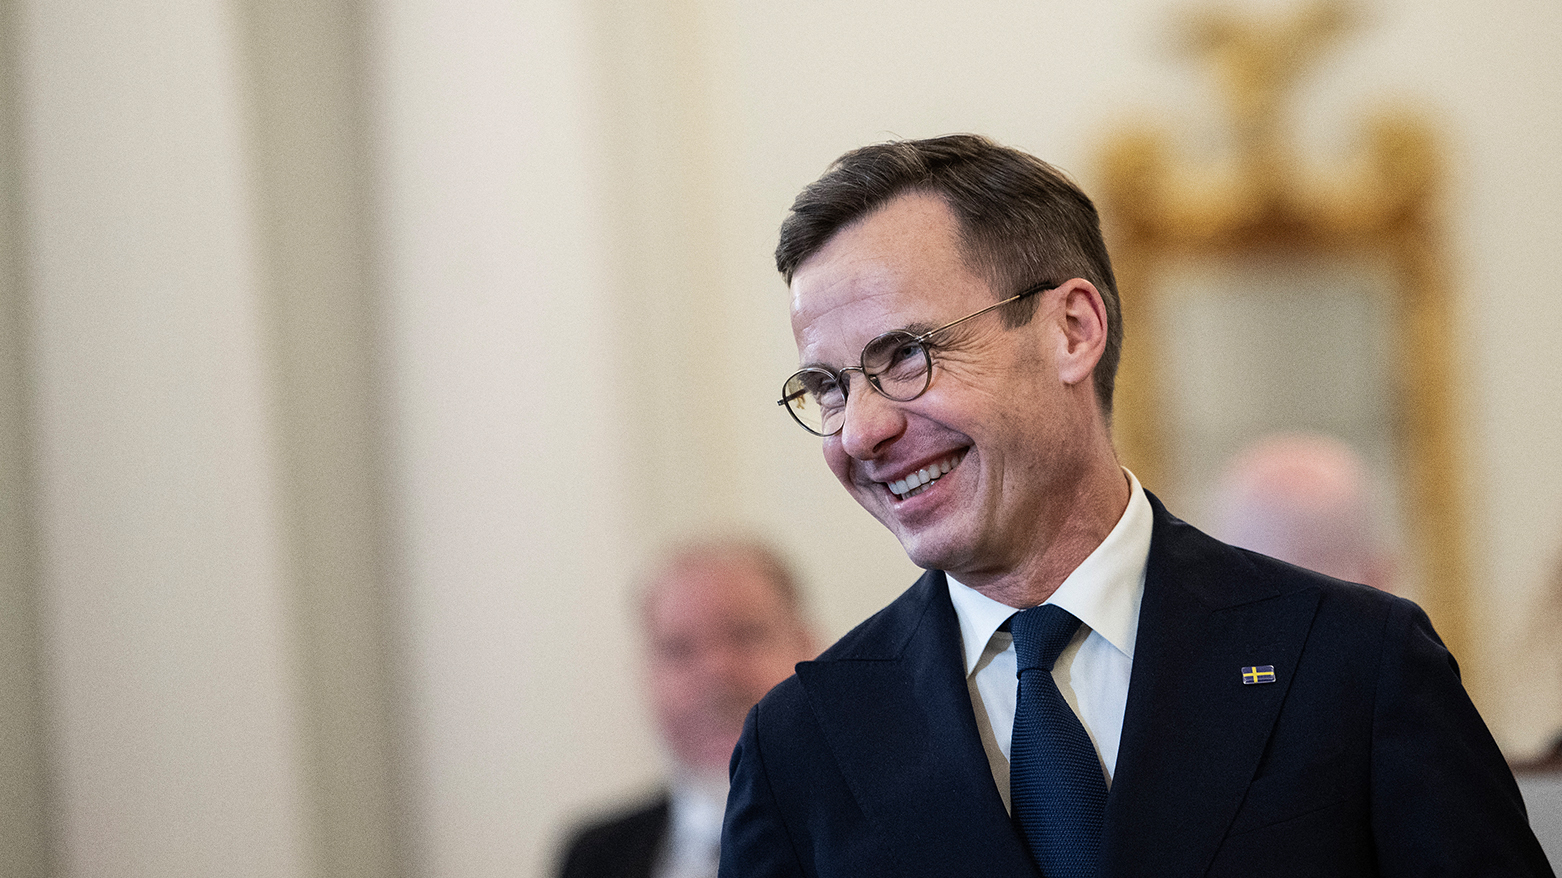 Swedish Prime Minister Ulf Kristersson attends the NATO ratification ceremony. (Photo: ANDREW CABALLERO-REYNOLDS / AFP)